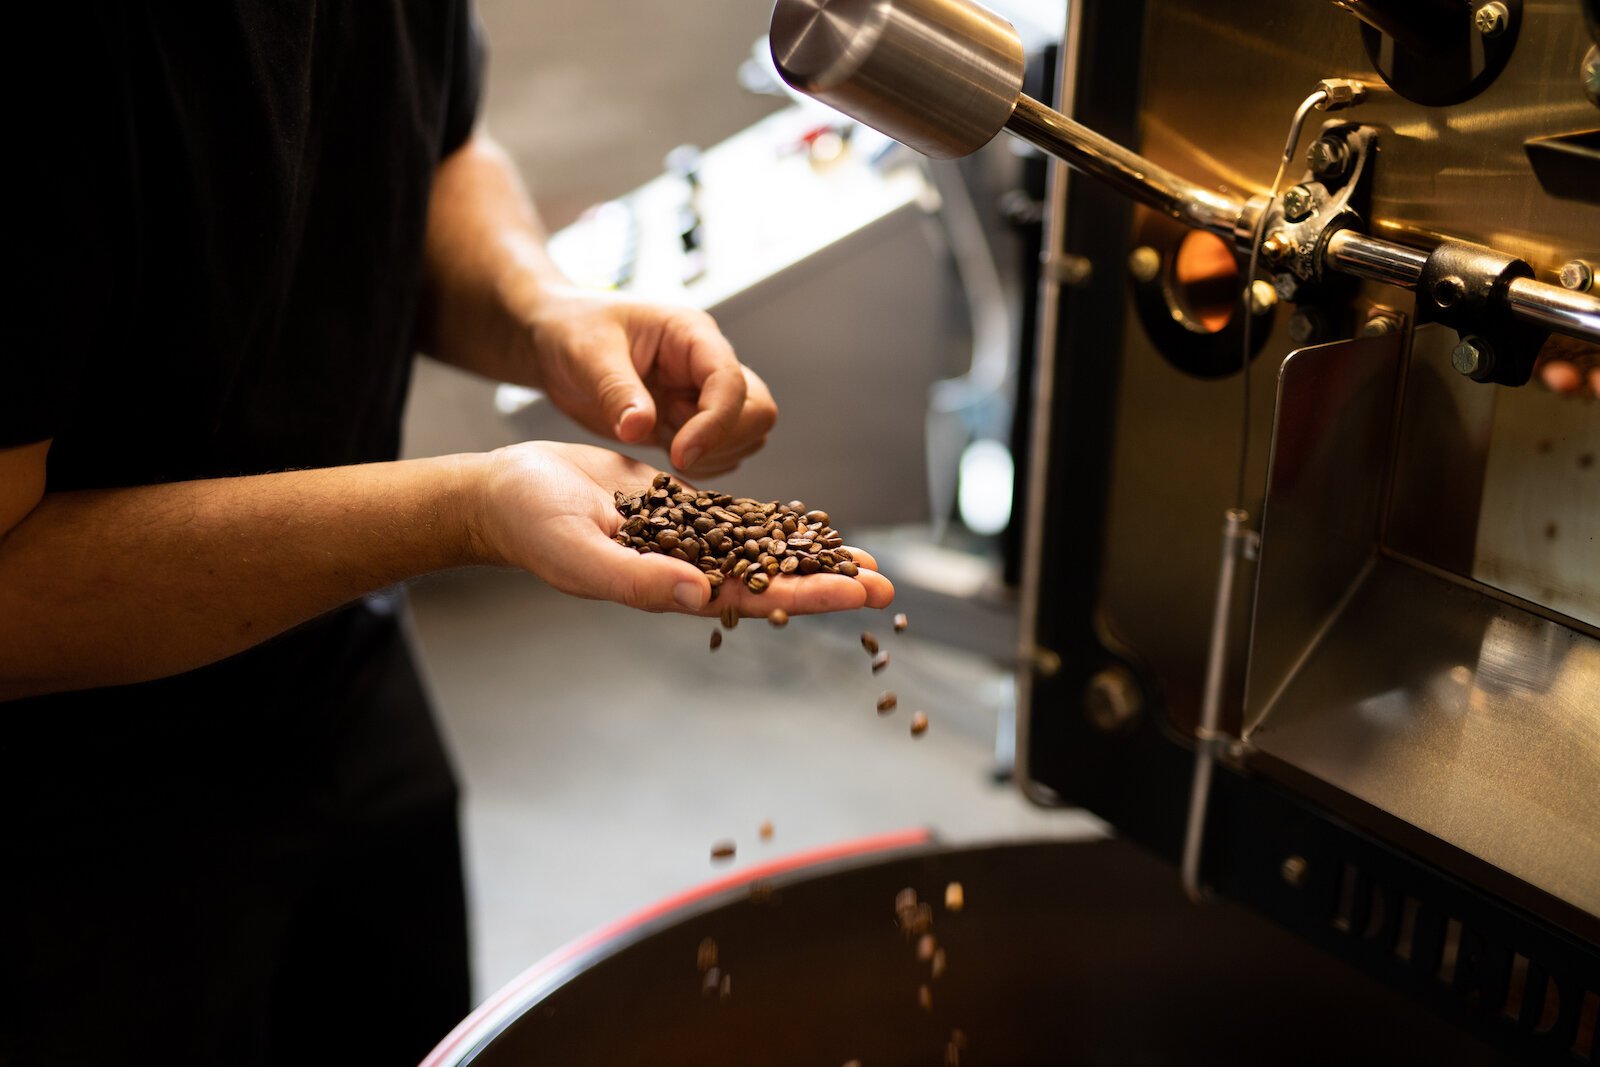 Brehany sifts through coffee beans for quality control.